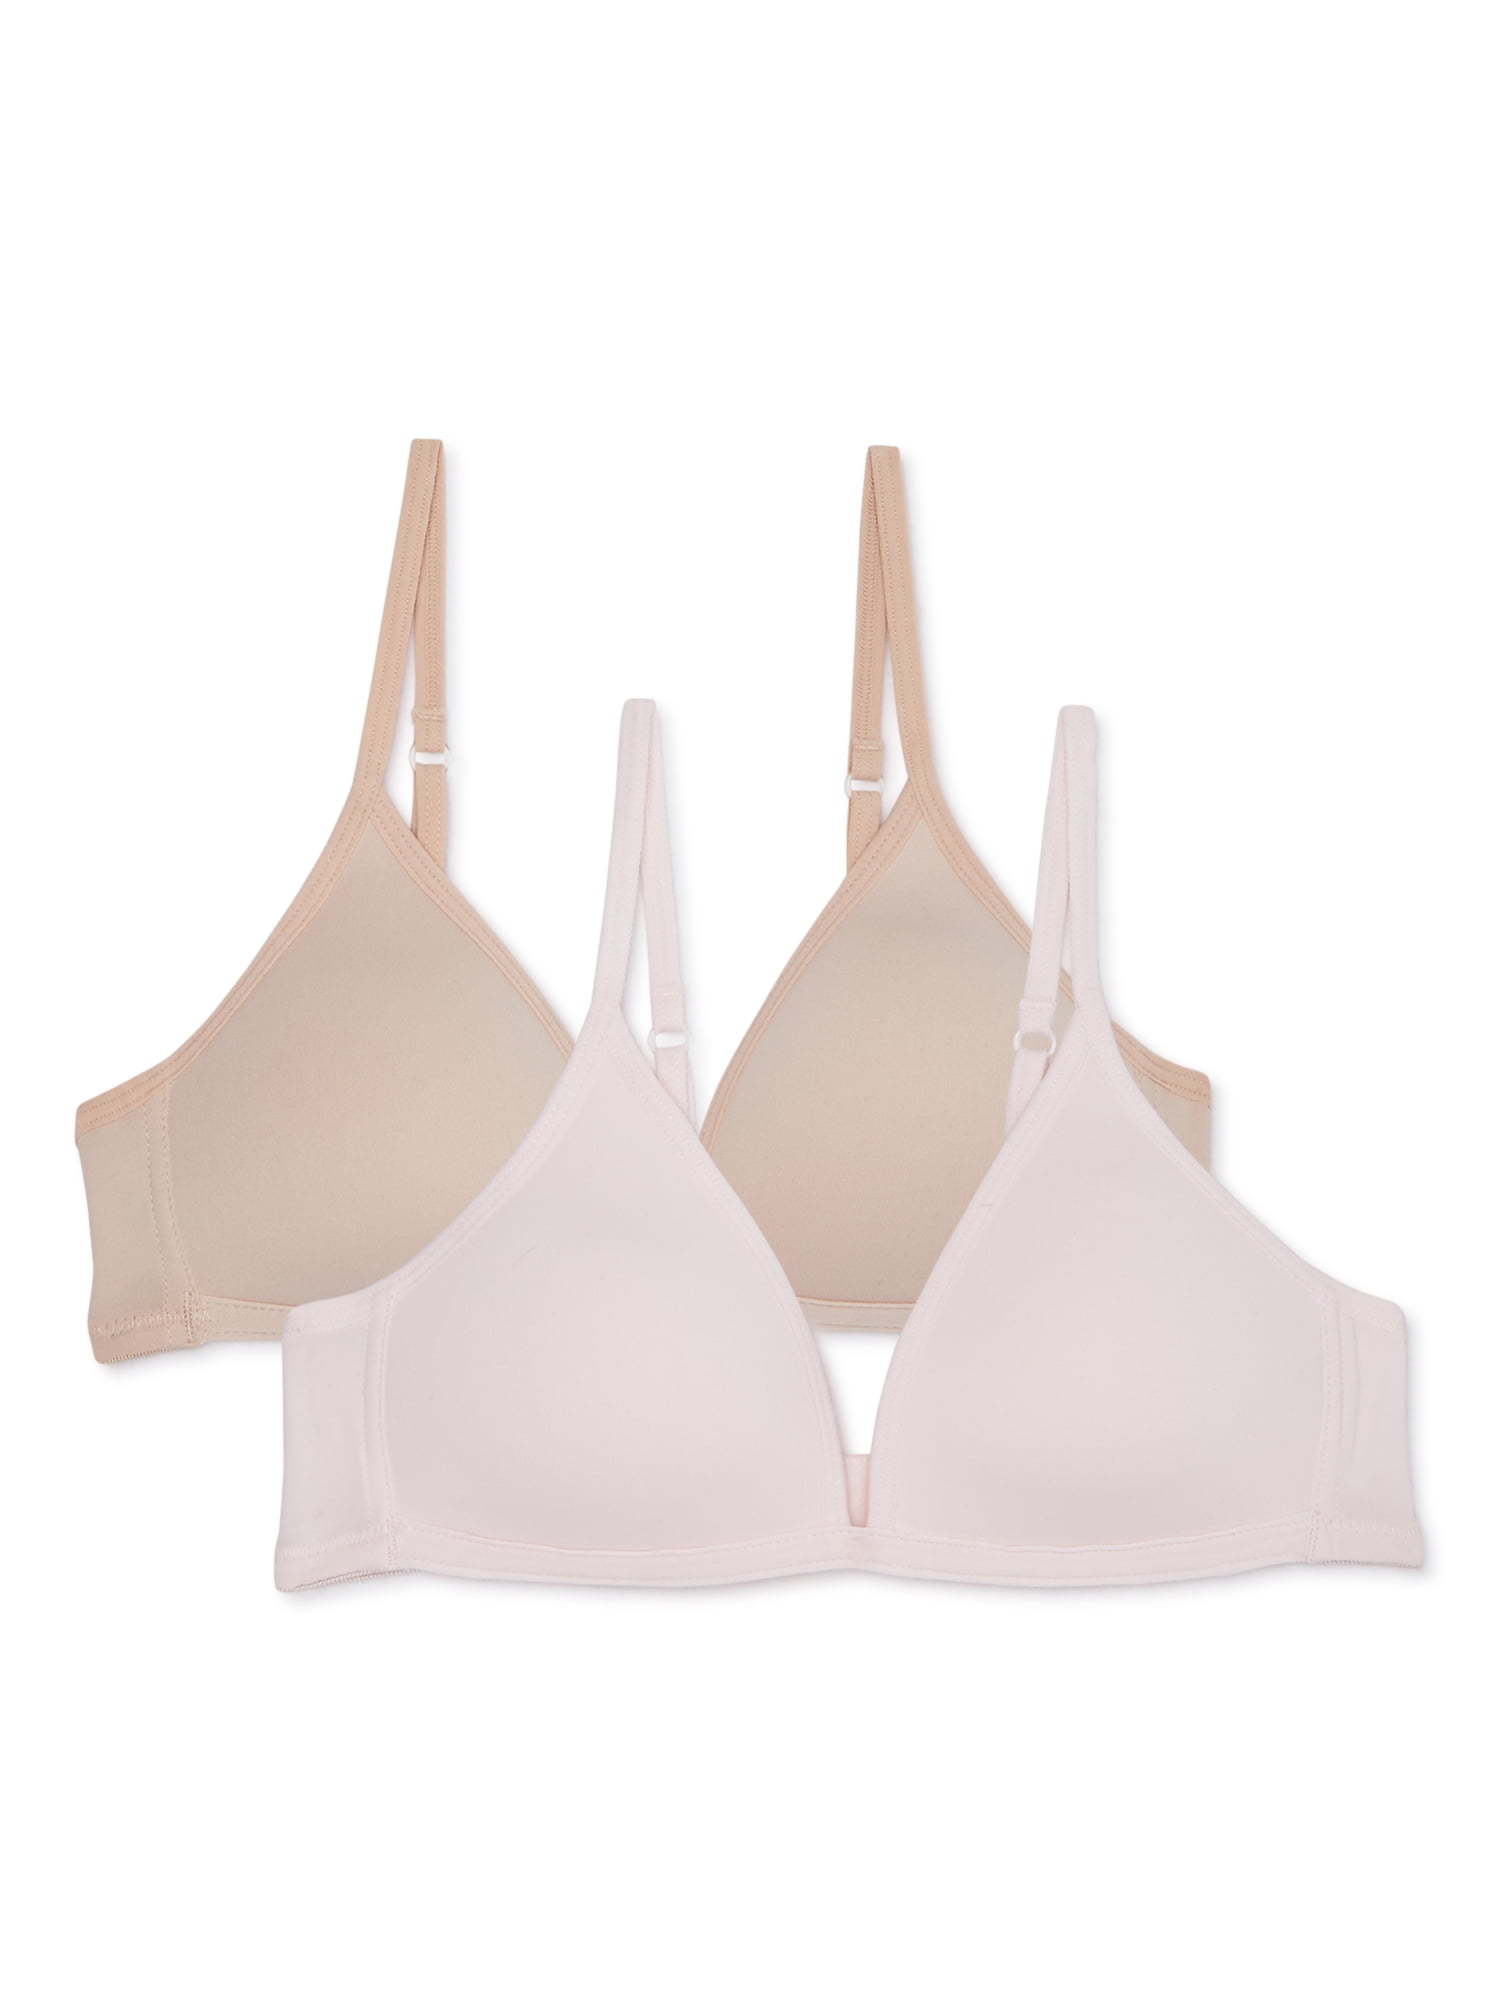 Maidenform Girls Molded Wireless Bras, 2-Pack, Sizes 30A-36A 